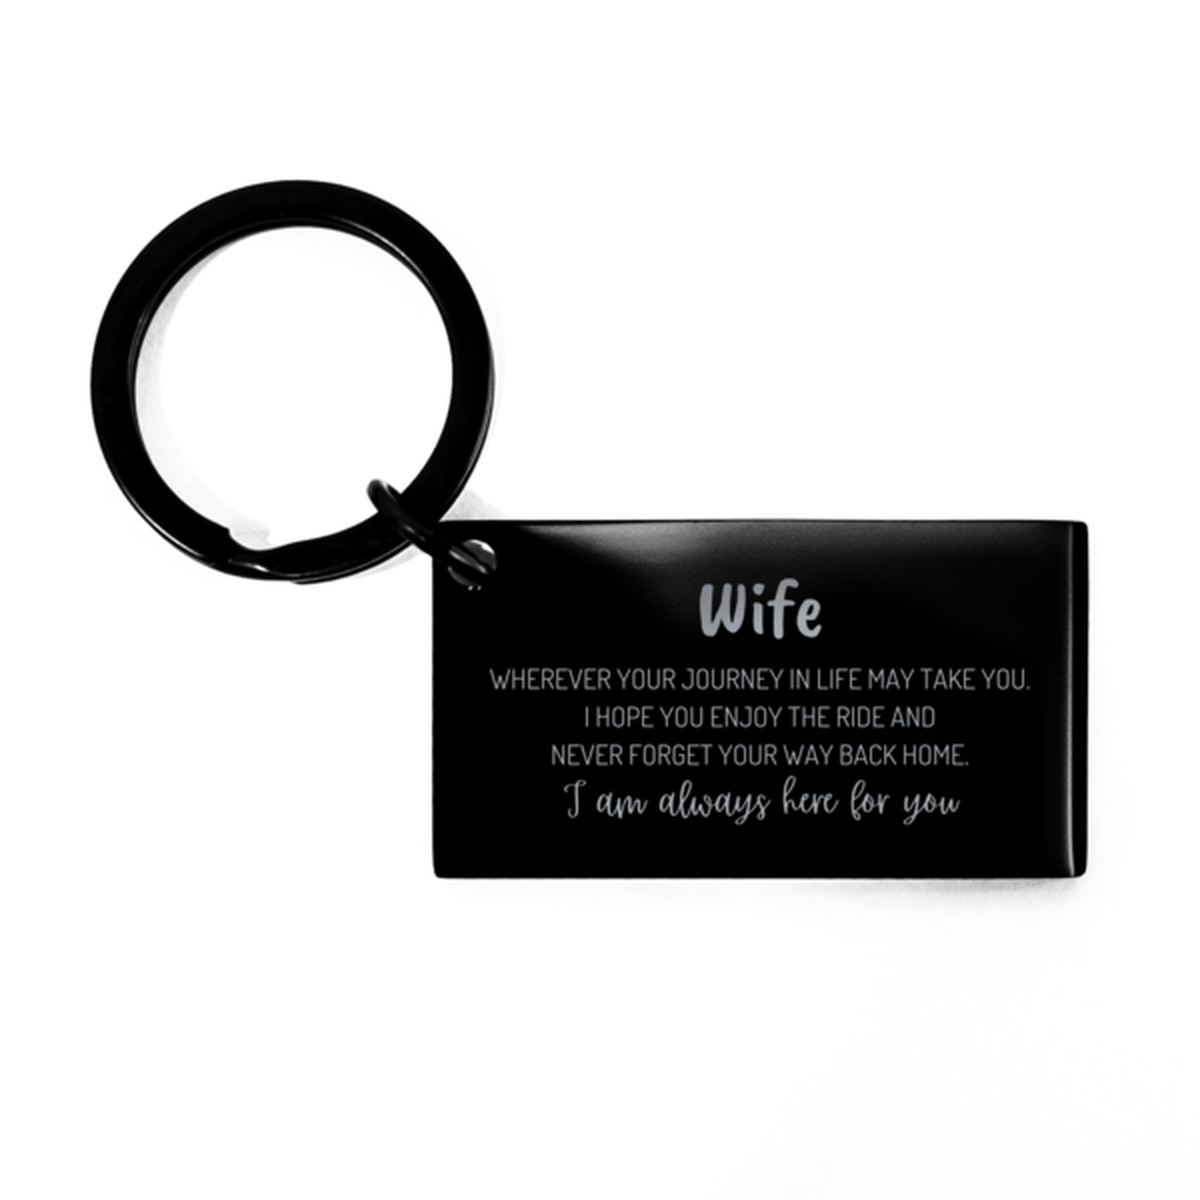 Wife wherever your journey in life may take you, I am always here for you Wife Keychain, Awesome Christmas Gifts For Wife, Wife Birthday Gifts for Men Women Family Loved One